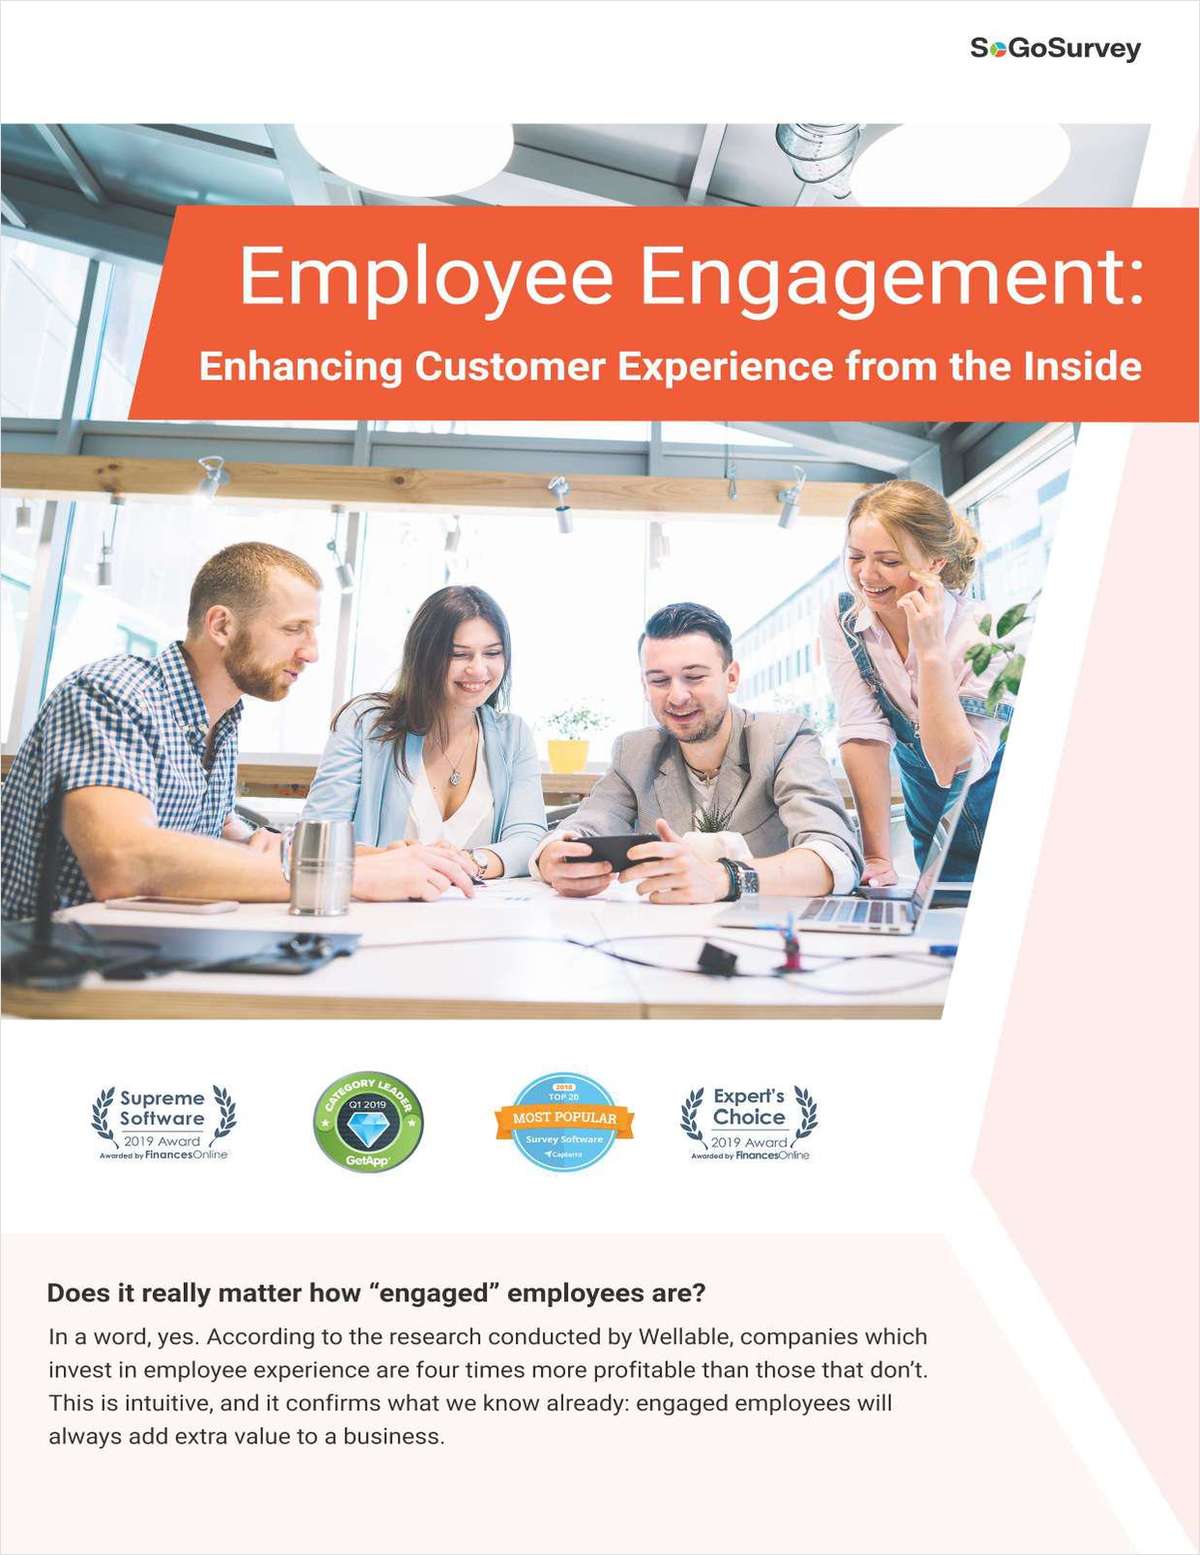 Employee Engagement: Enhancing Customer Experience from The Inside